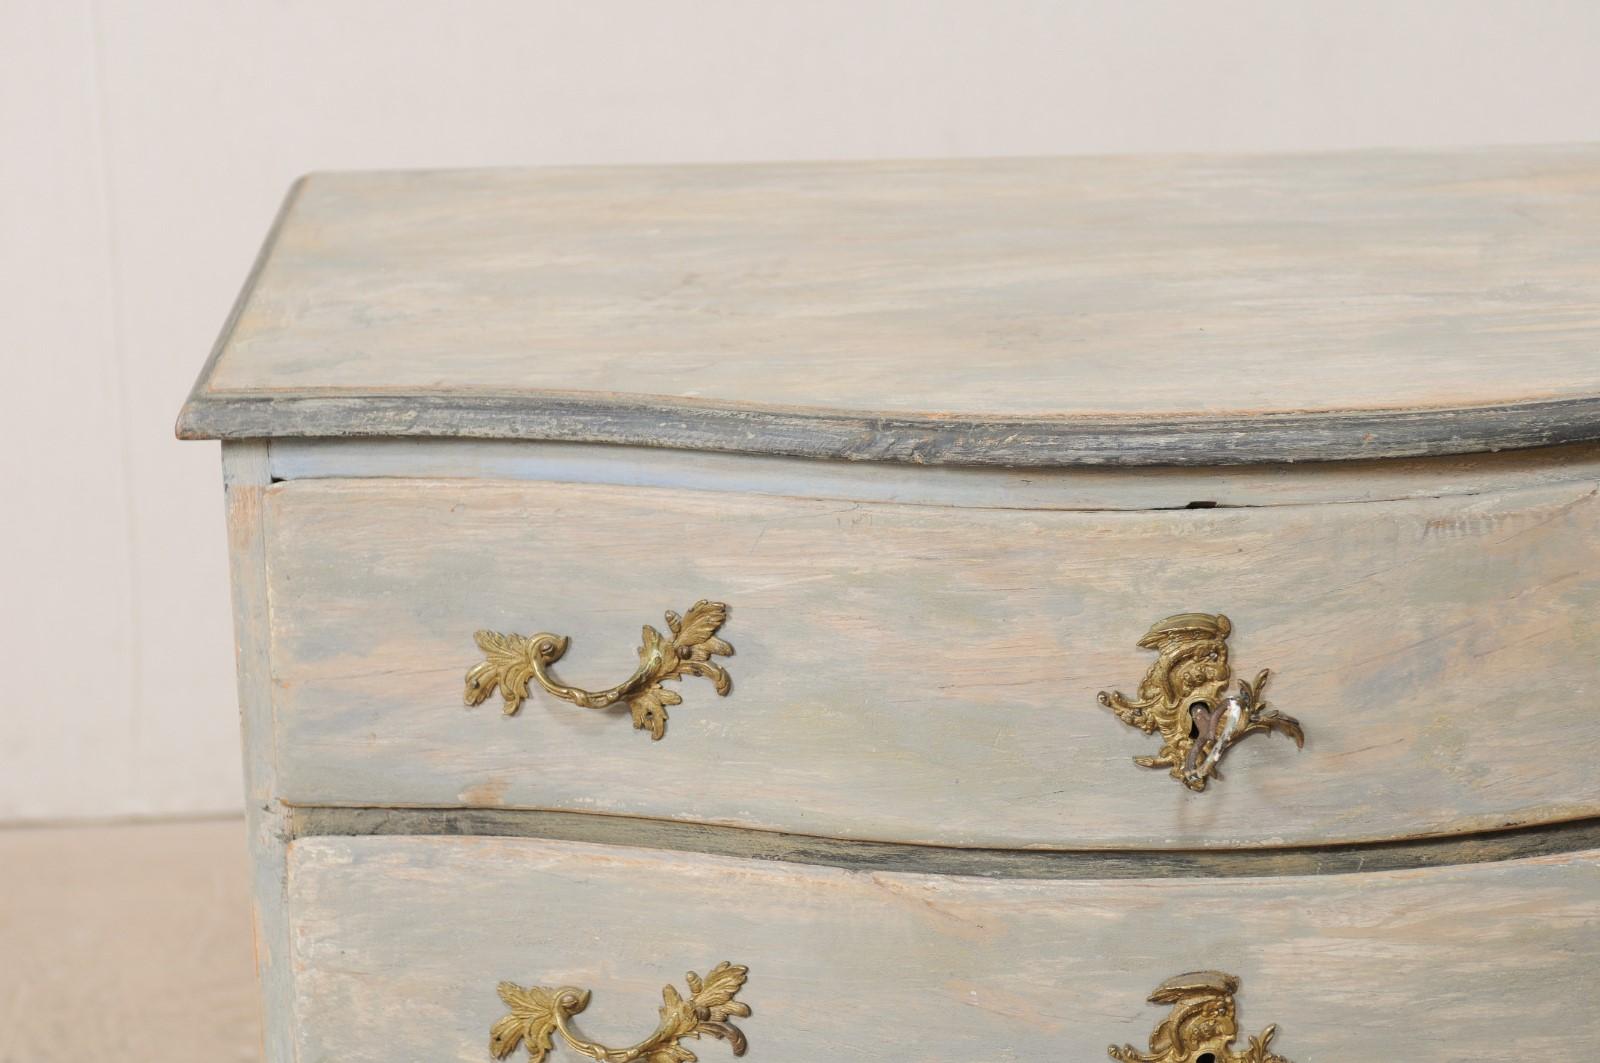 Wood An 18th Century Swedish Period Rococo Chest of Drawers with Serpentine Body